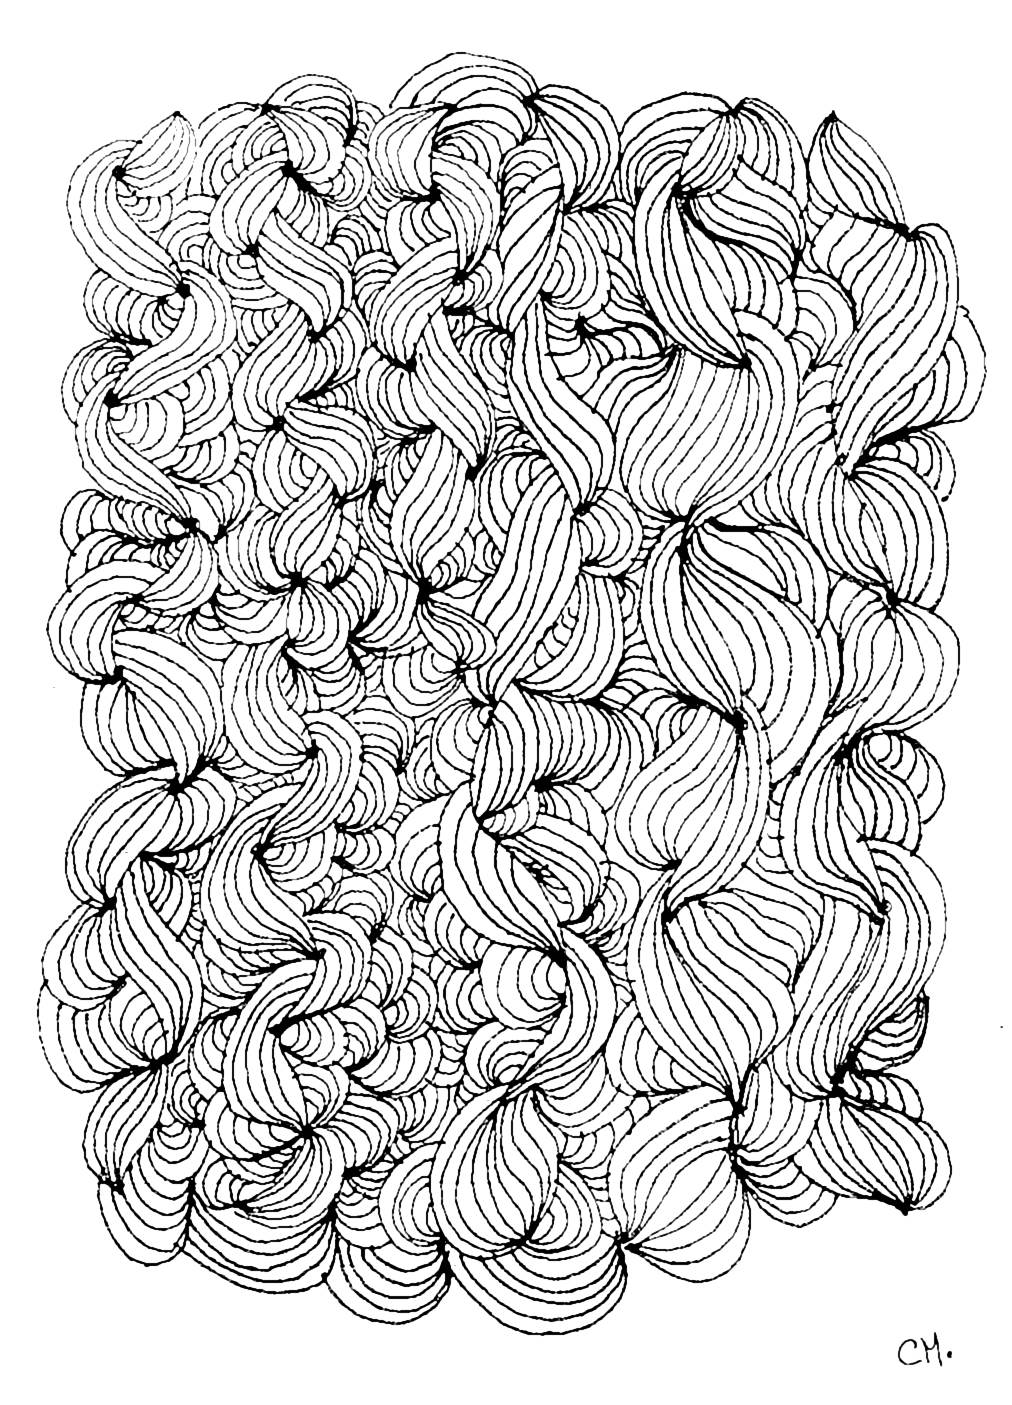 Zentangle coloring page to print and color